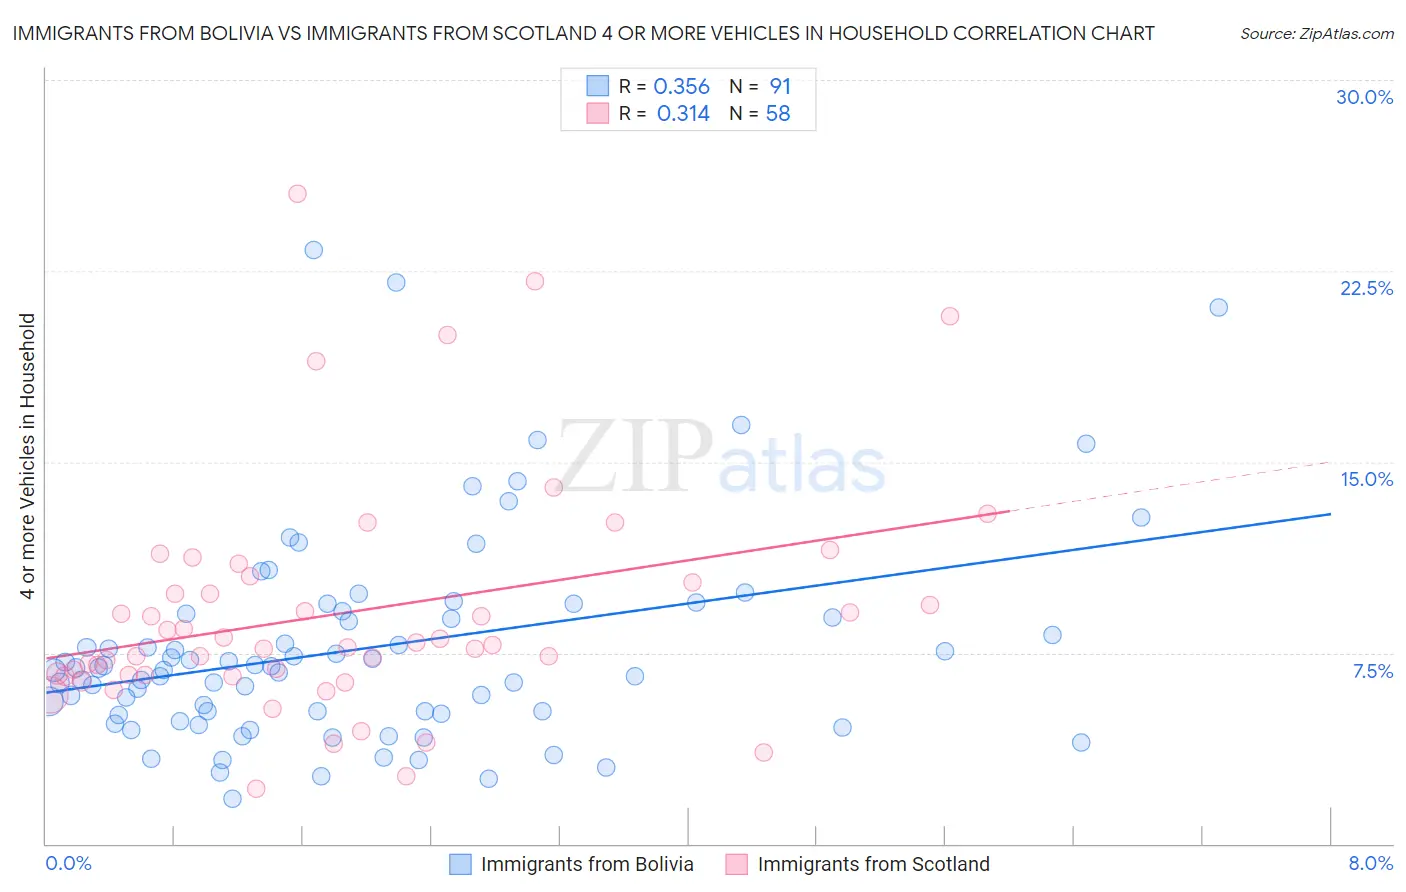 Immigrants from Bolivia vs Immigrants from Scotland 4 or more Vehicles in Household